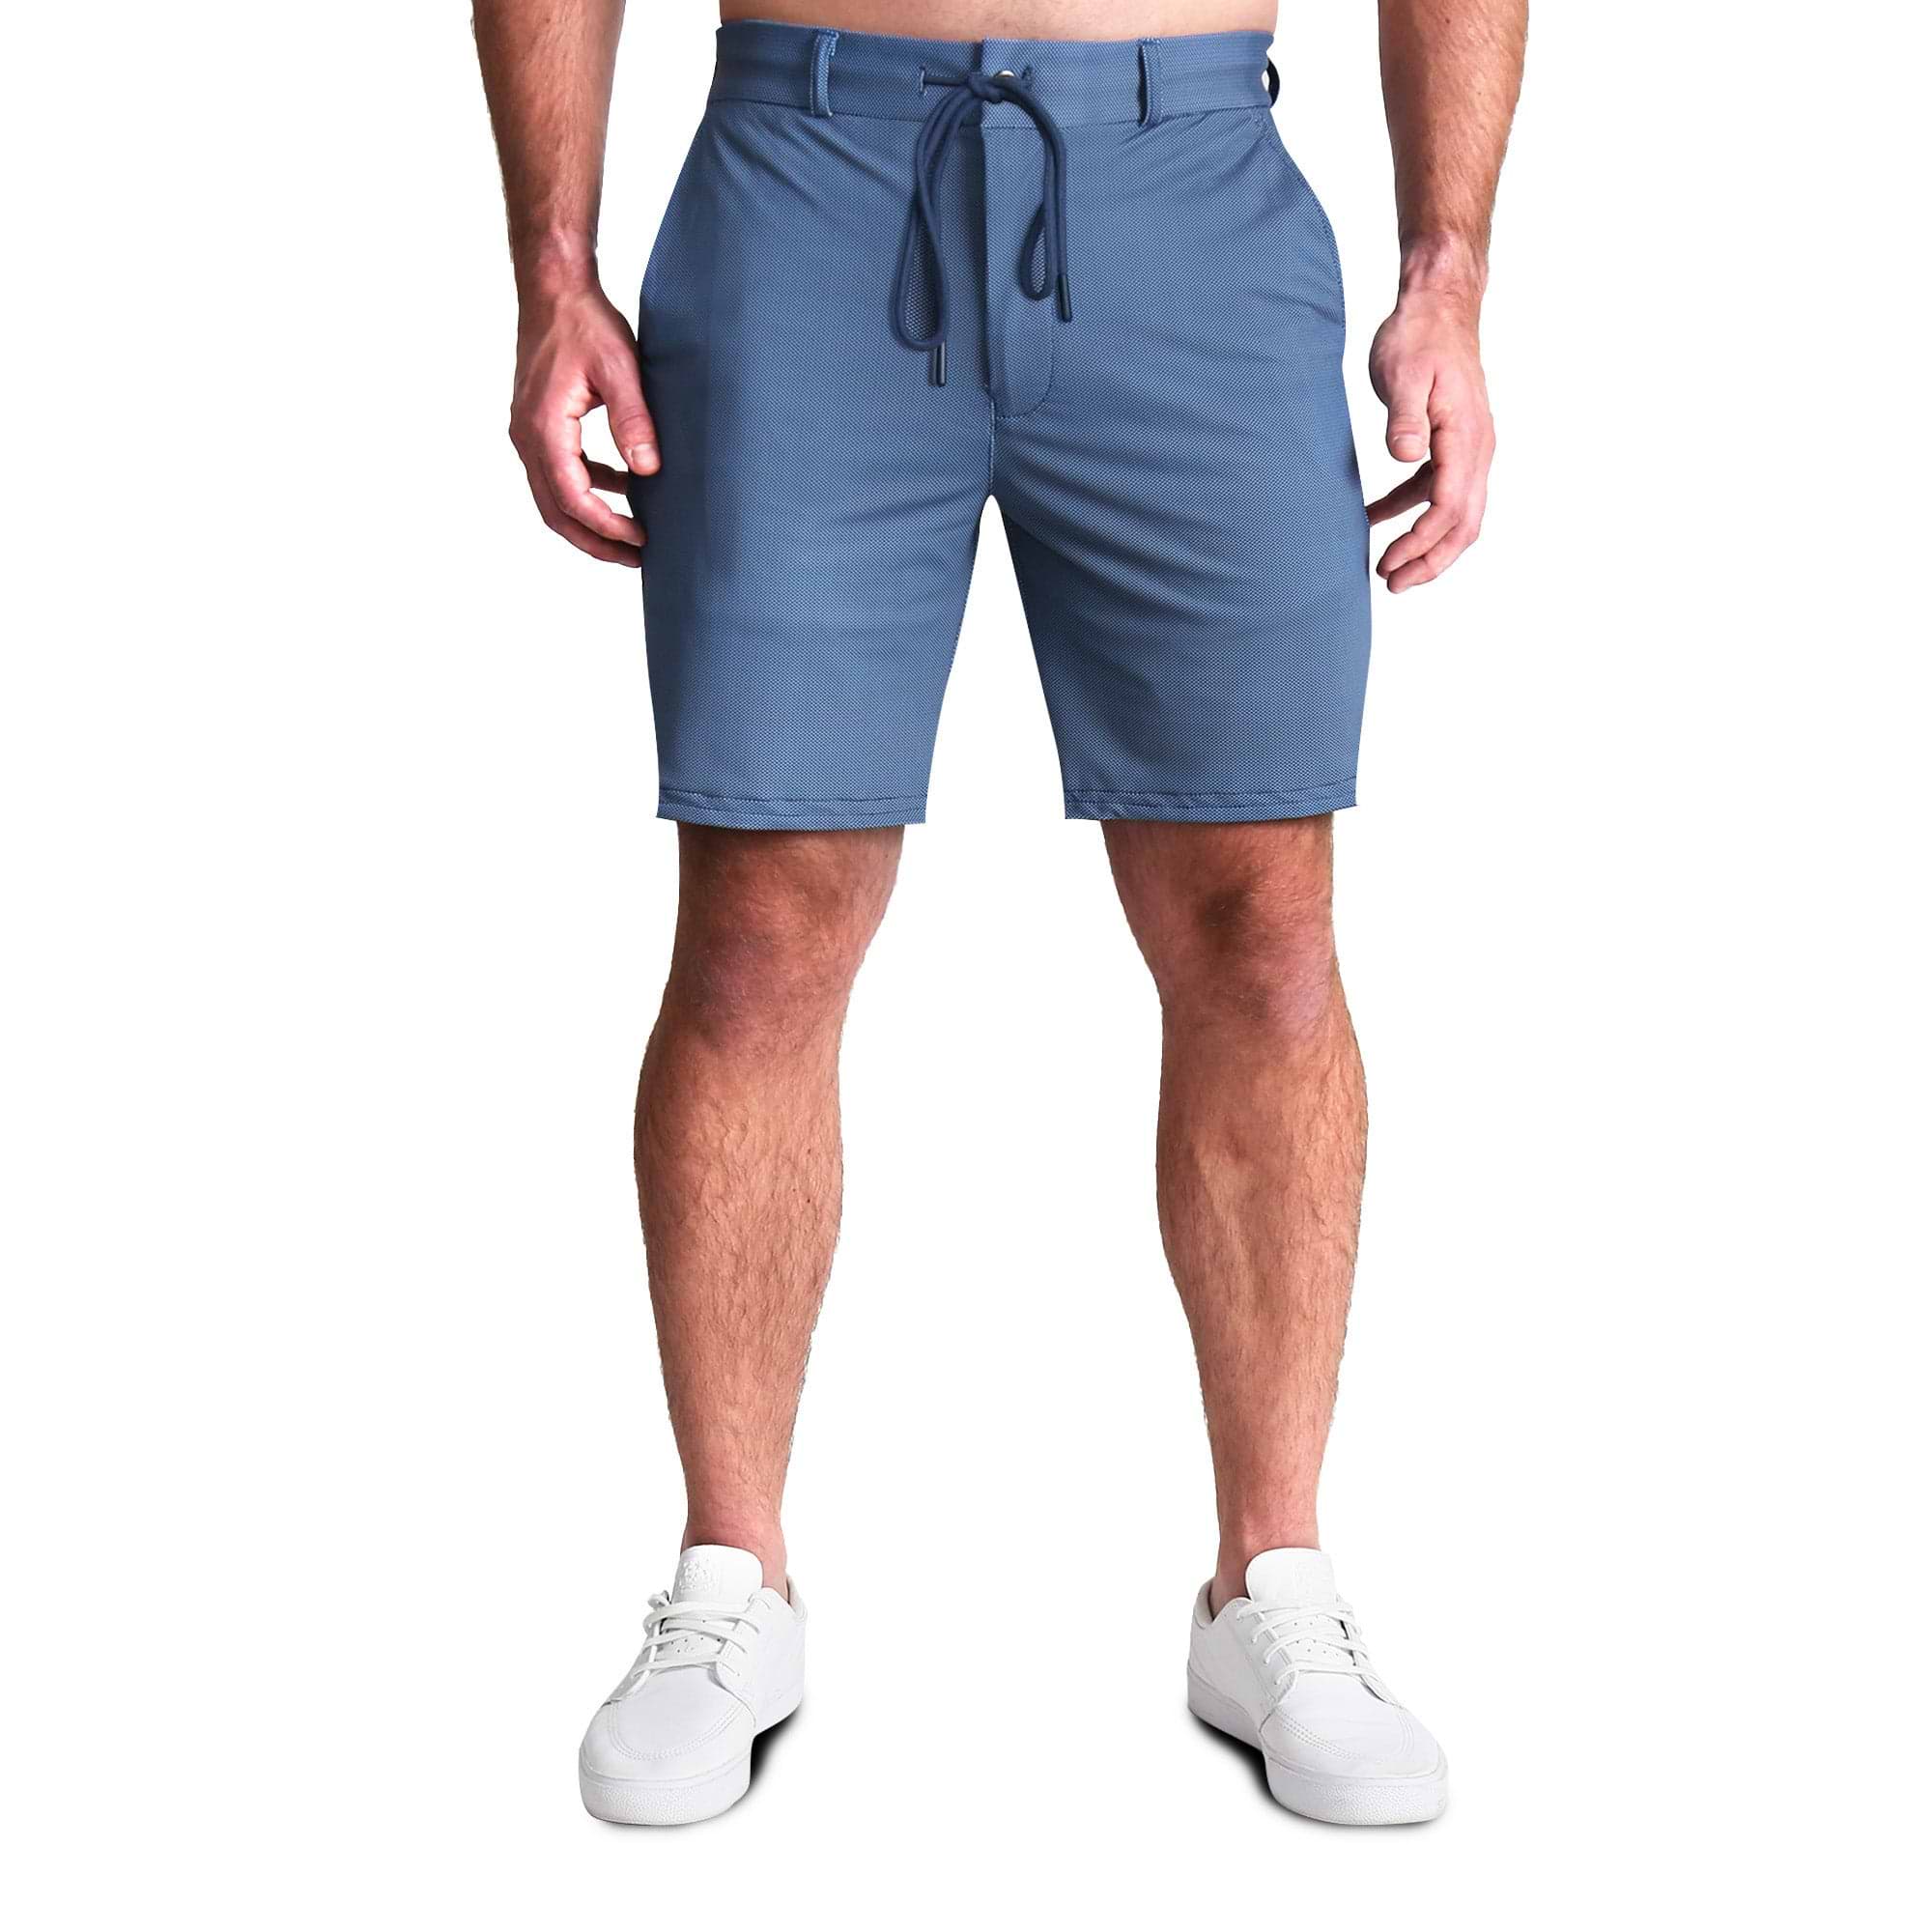 Athletic Fit Shorts– Fitizen